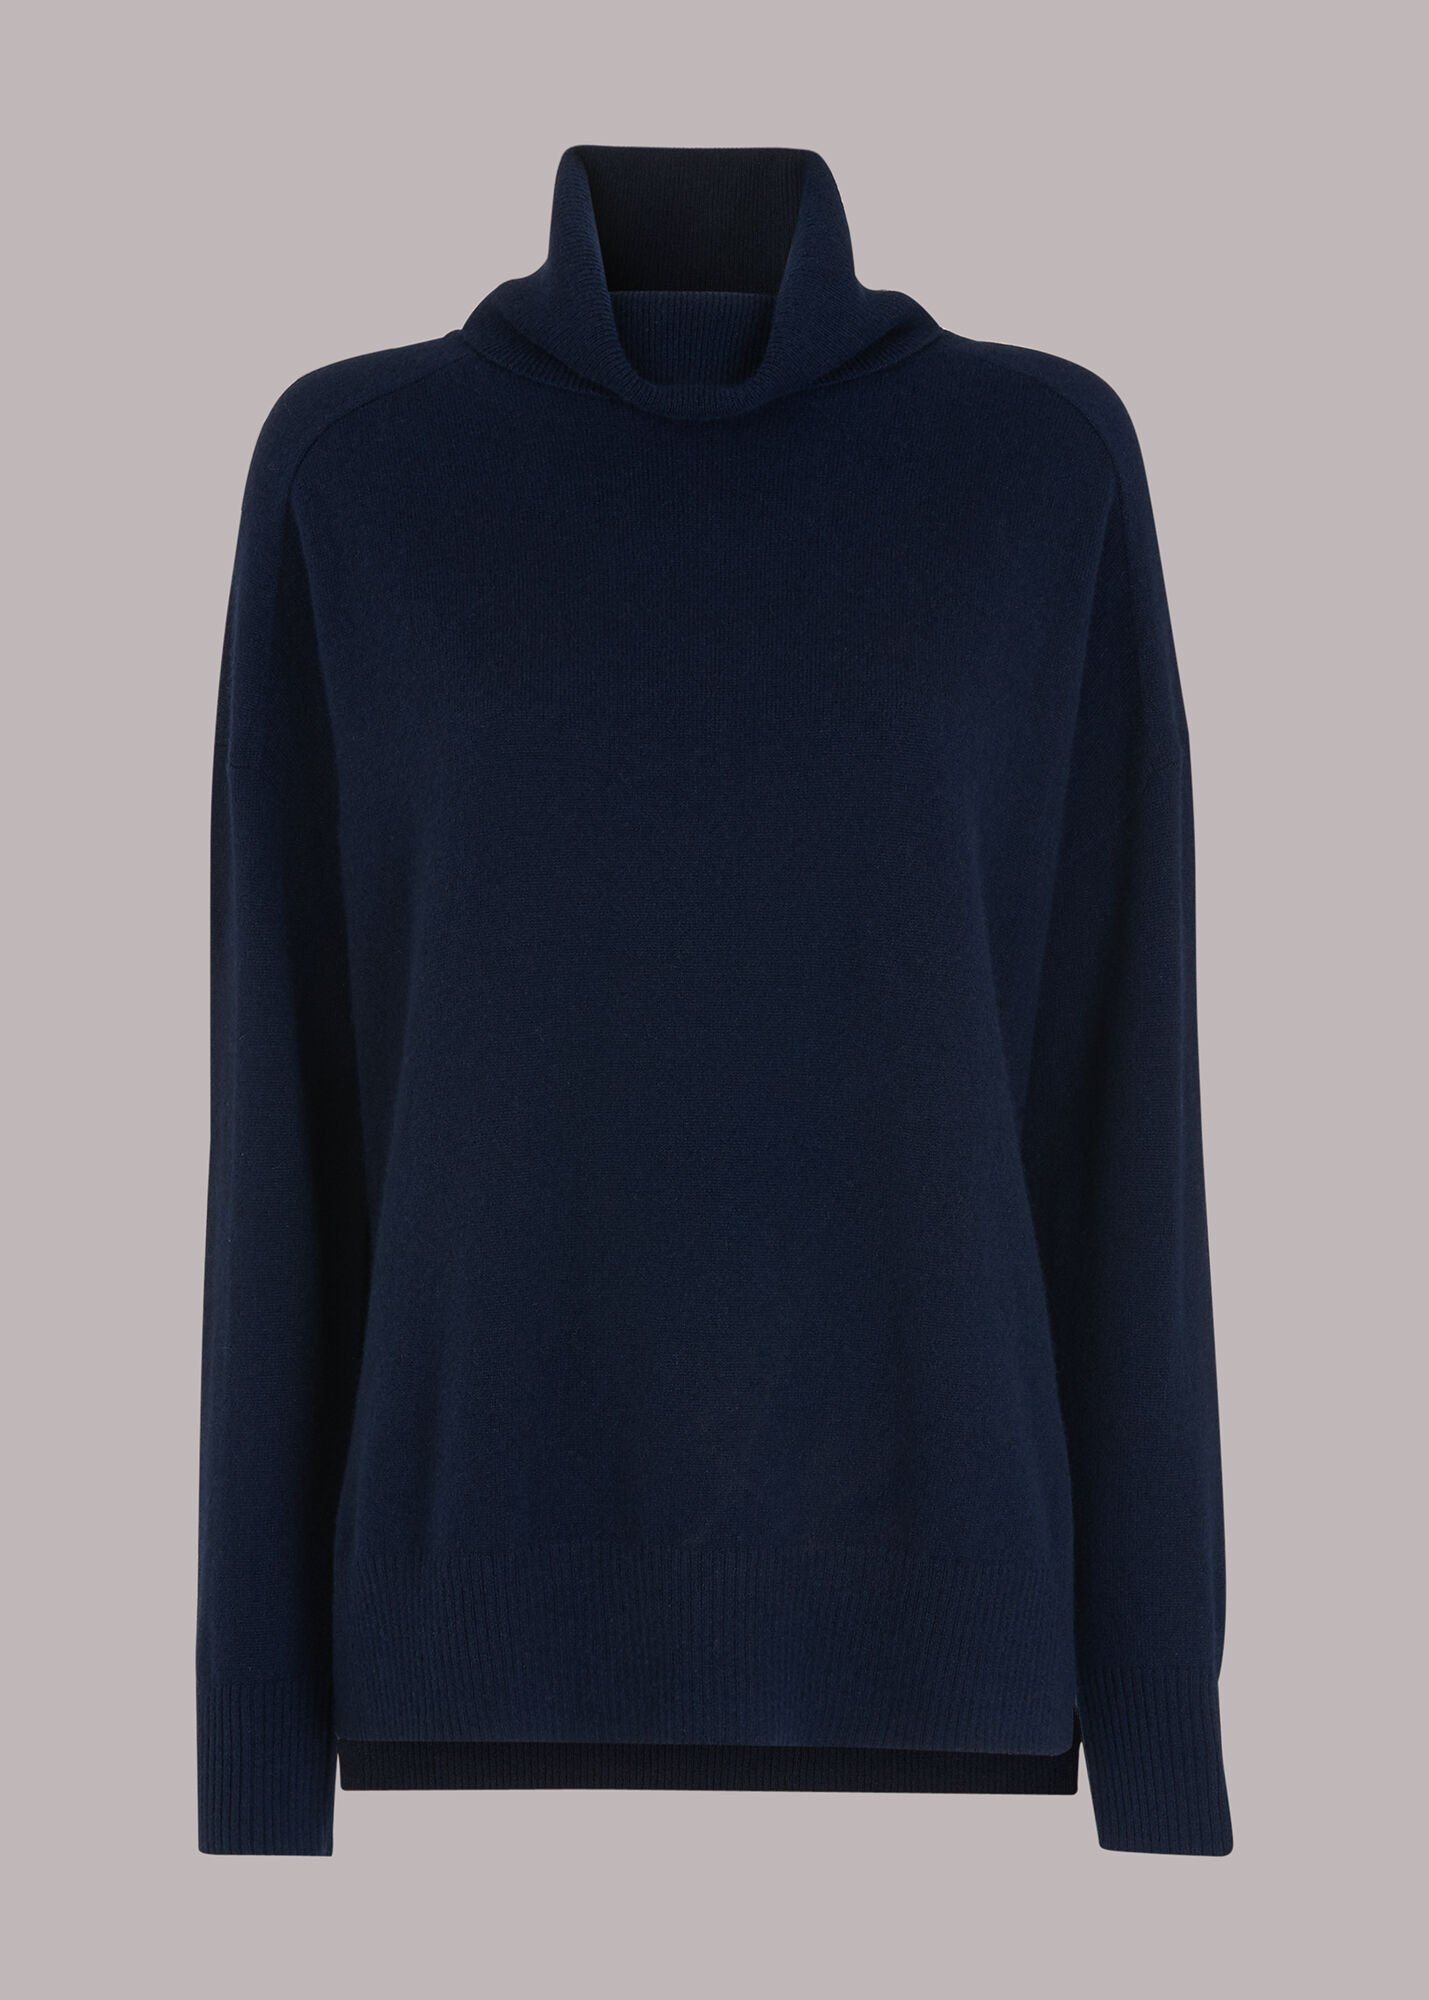 Navy Cashmere Roll Neck Jumper | WHISTLES